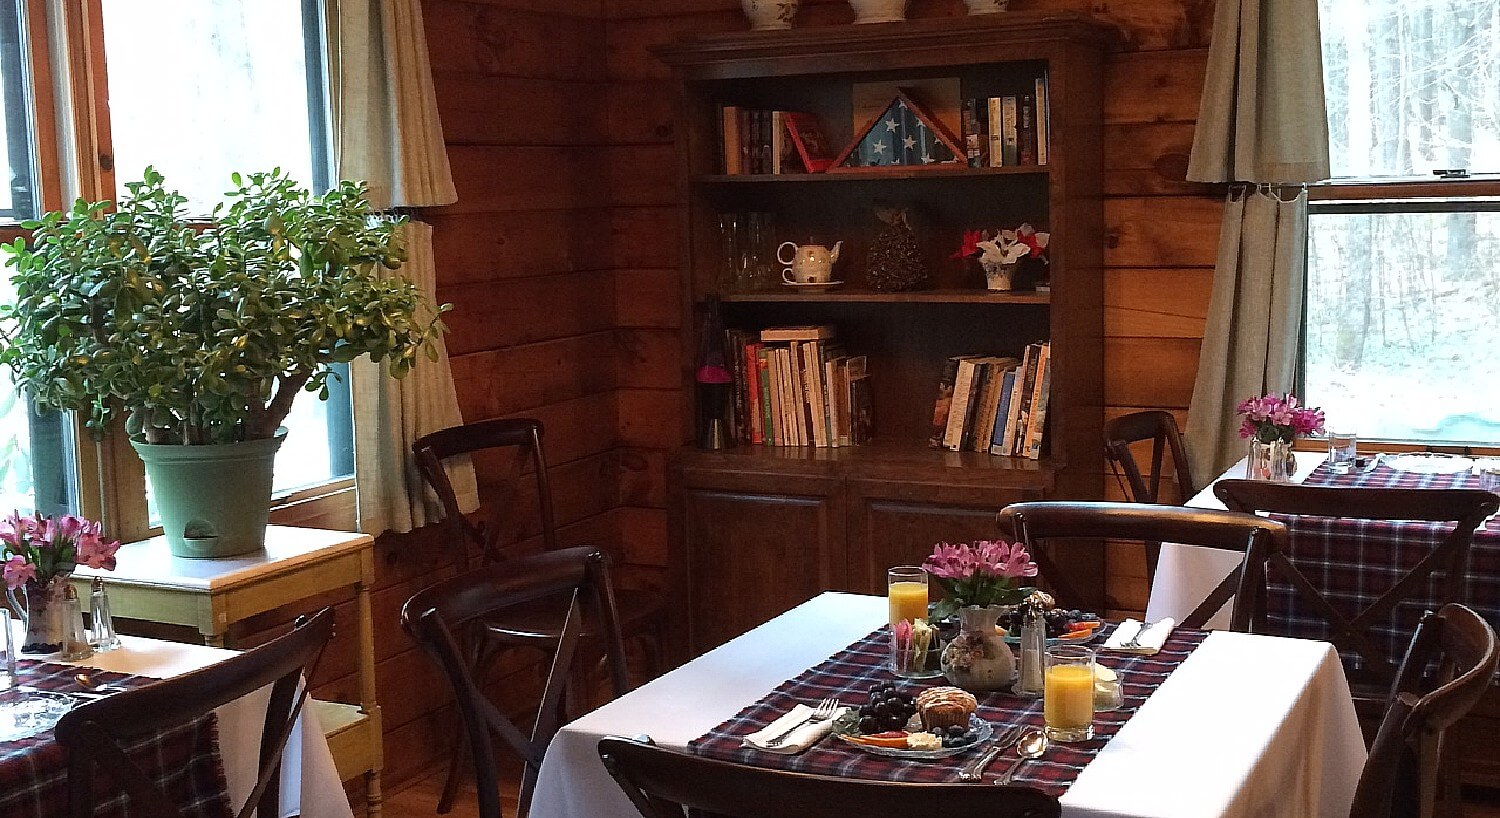 Corner of a room with wood paneled walls with three dining tables set for breakfast, bookshelf and table with plant in front of a bright window